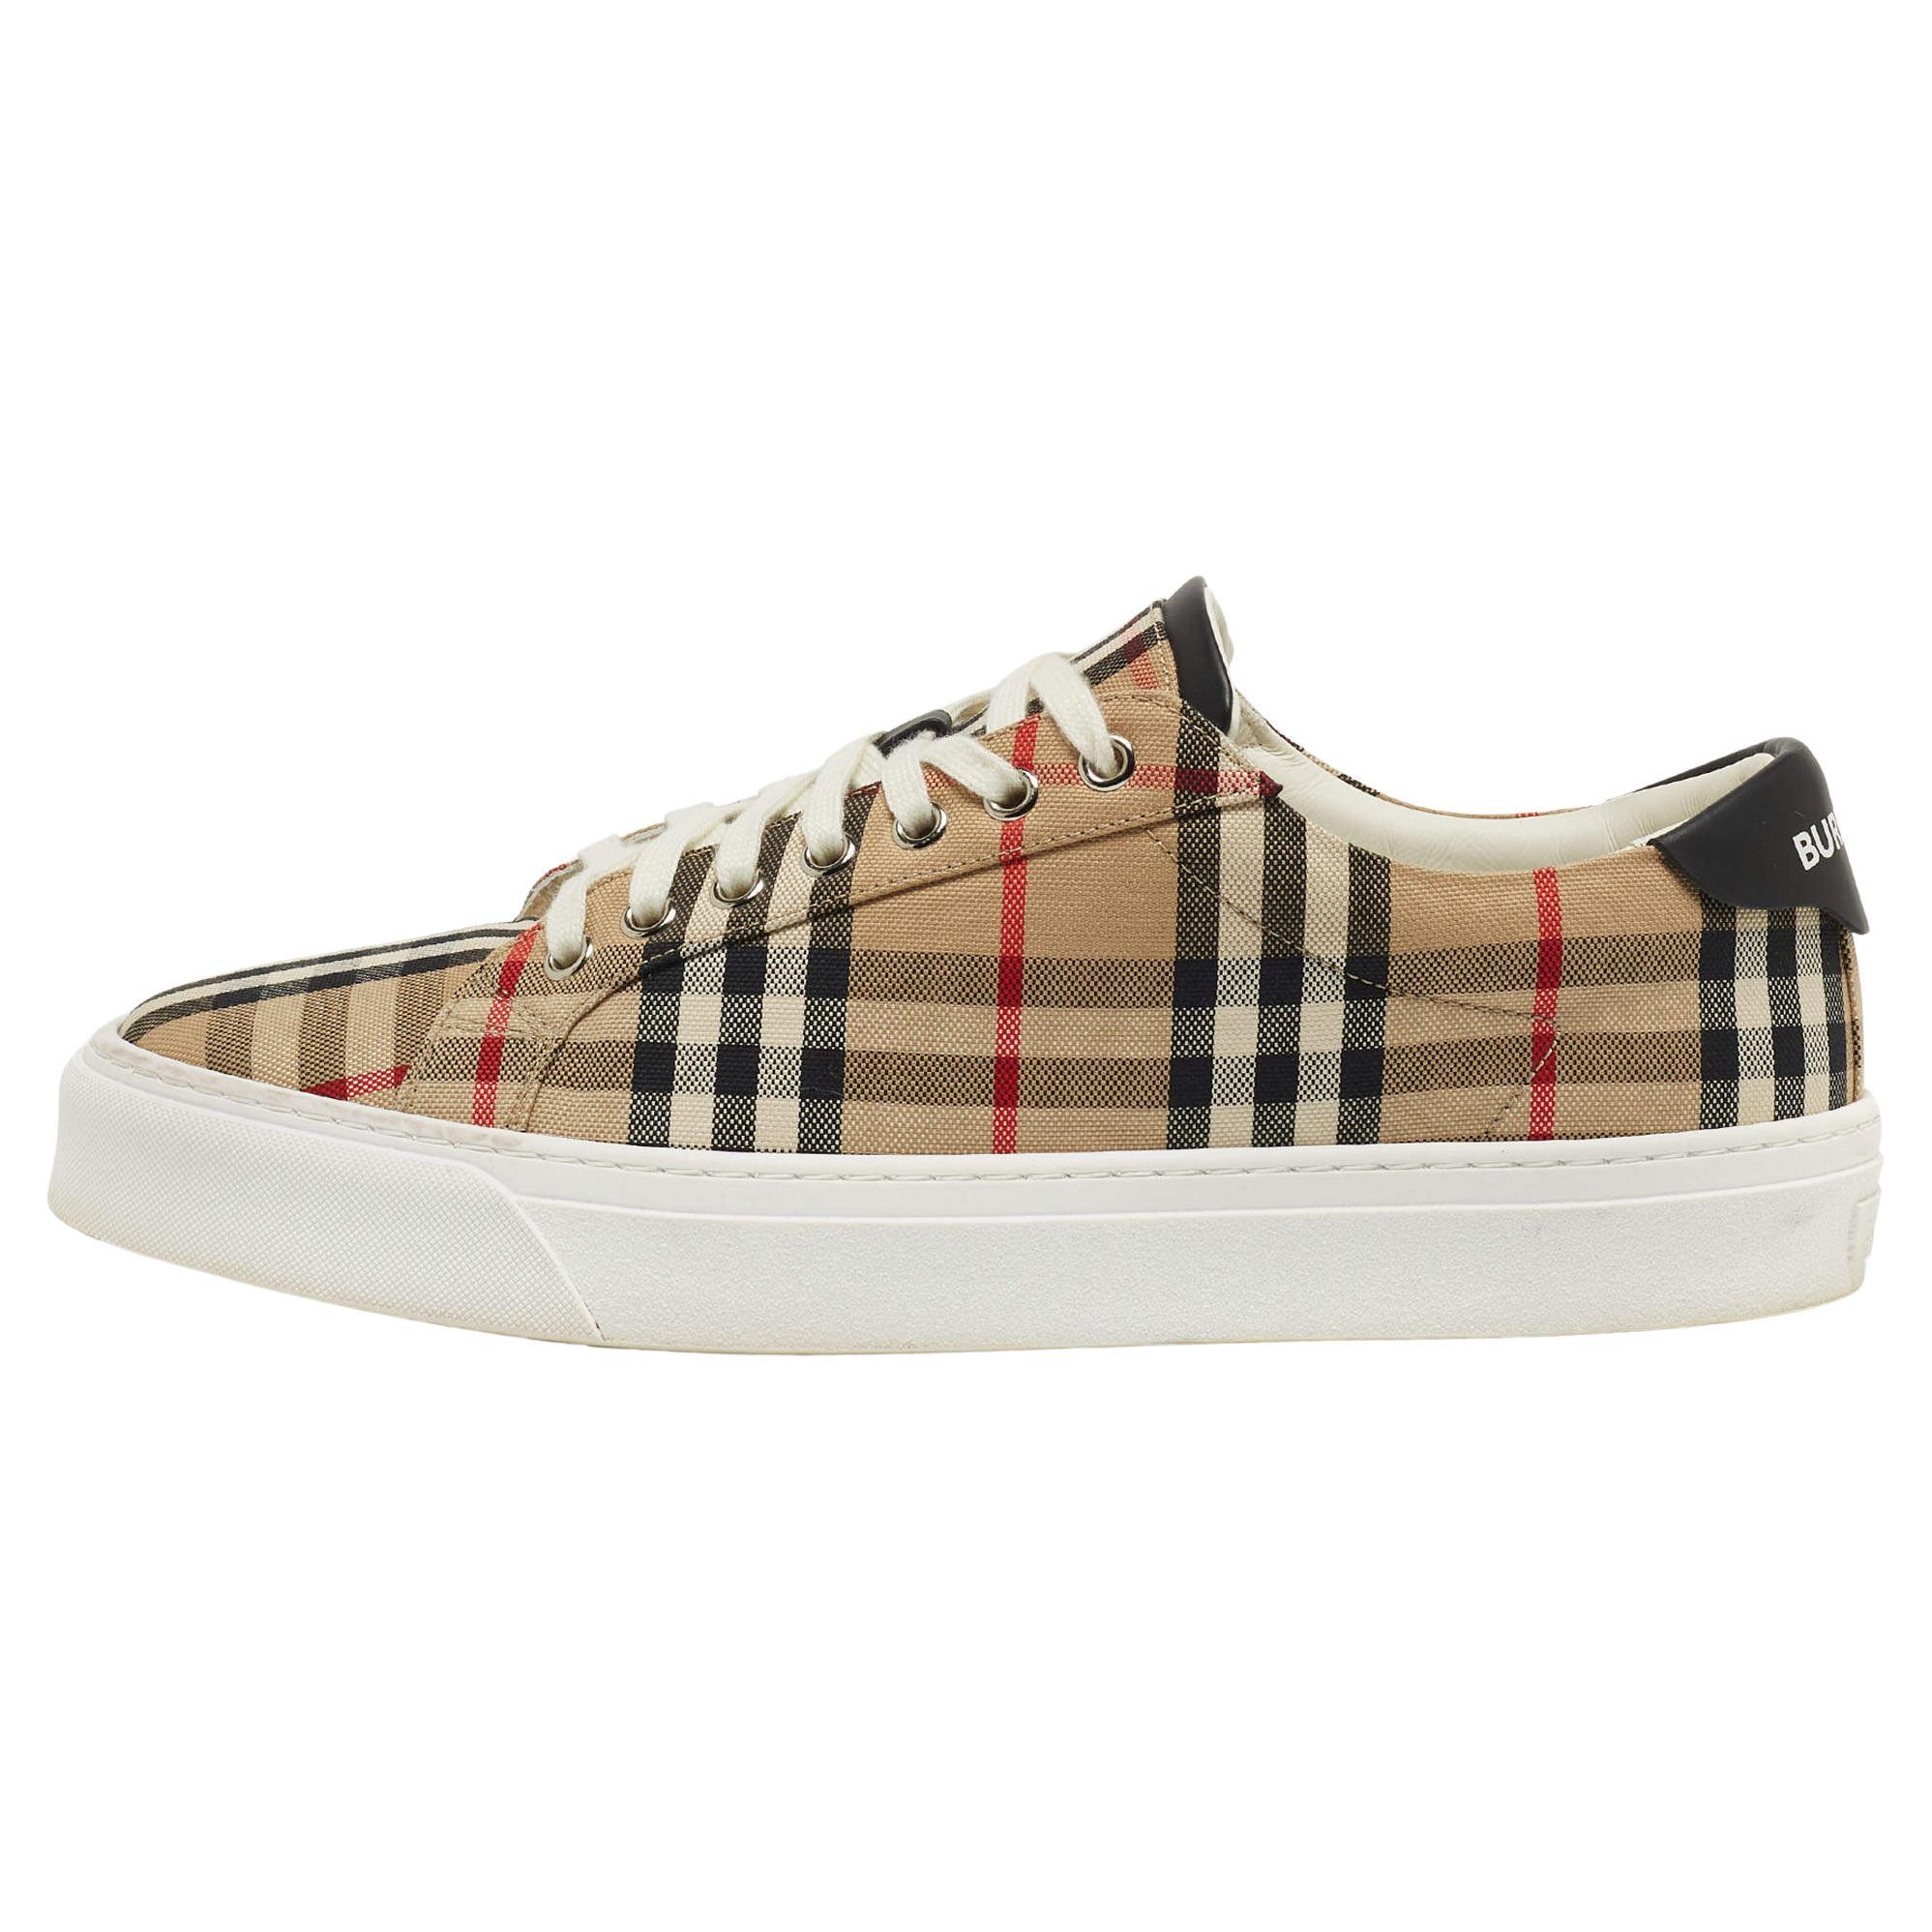 Burberry Beige Check Canvas Low Top Sneakers Size 43